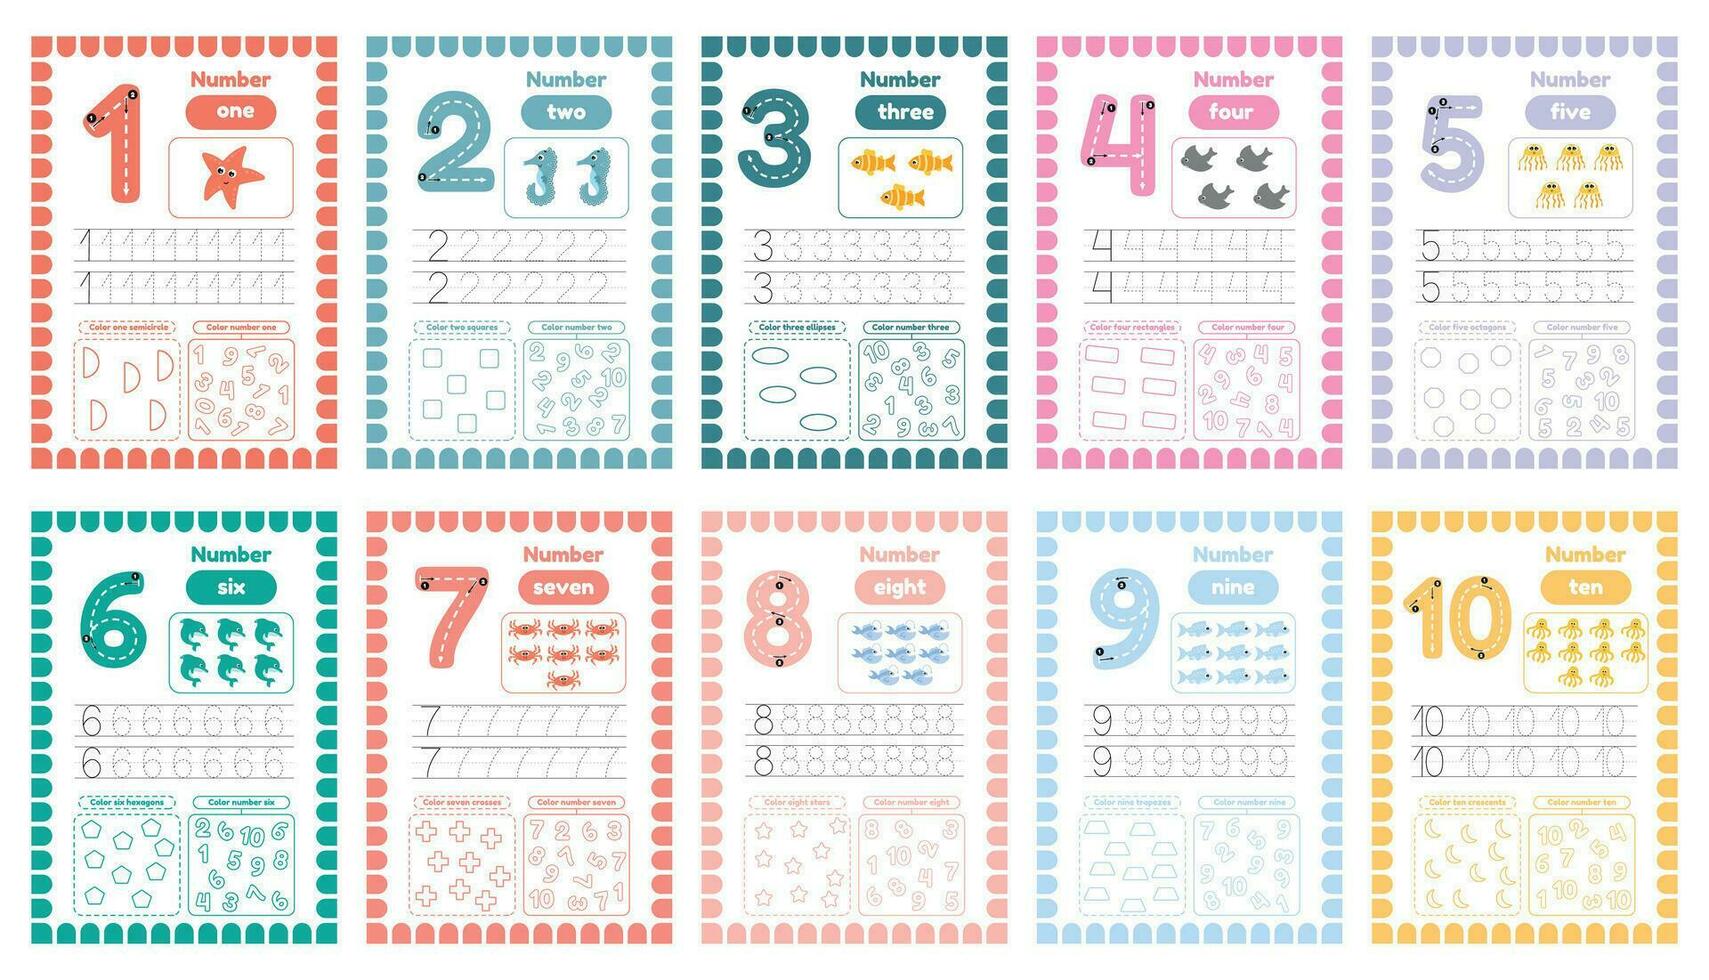 Learning numbers flaskcards for preschool kids. Set of activity worksheets with tracing vector